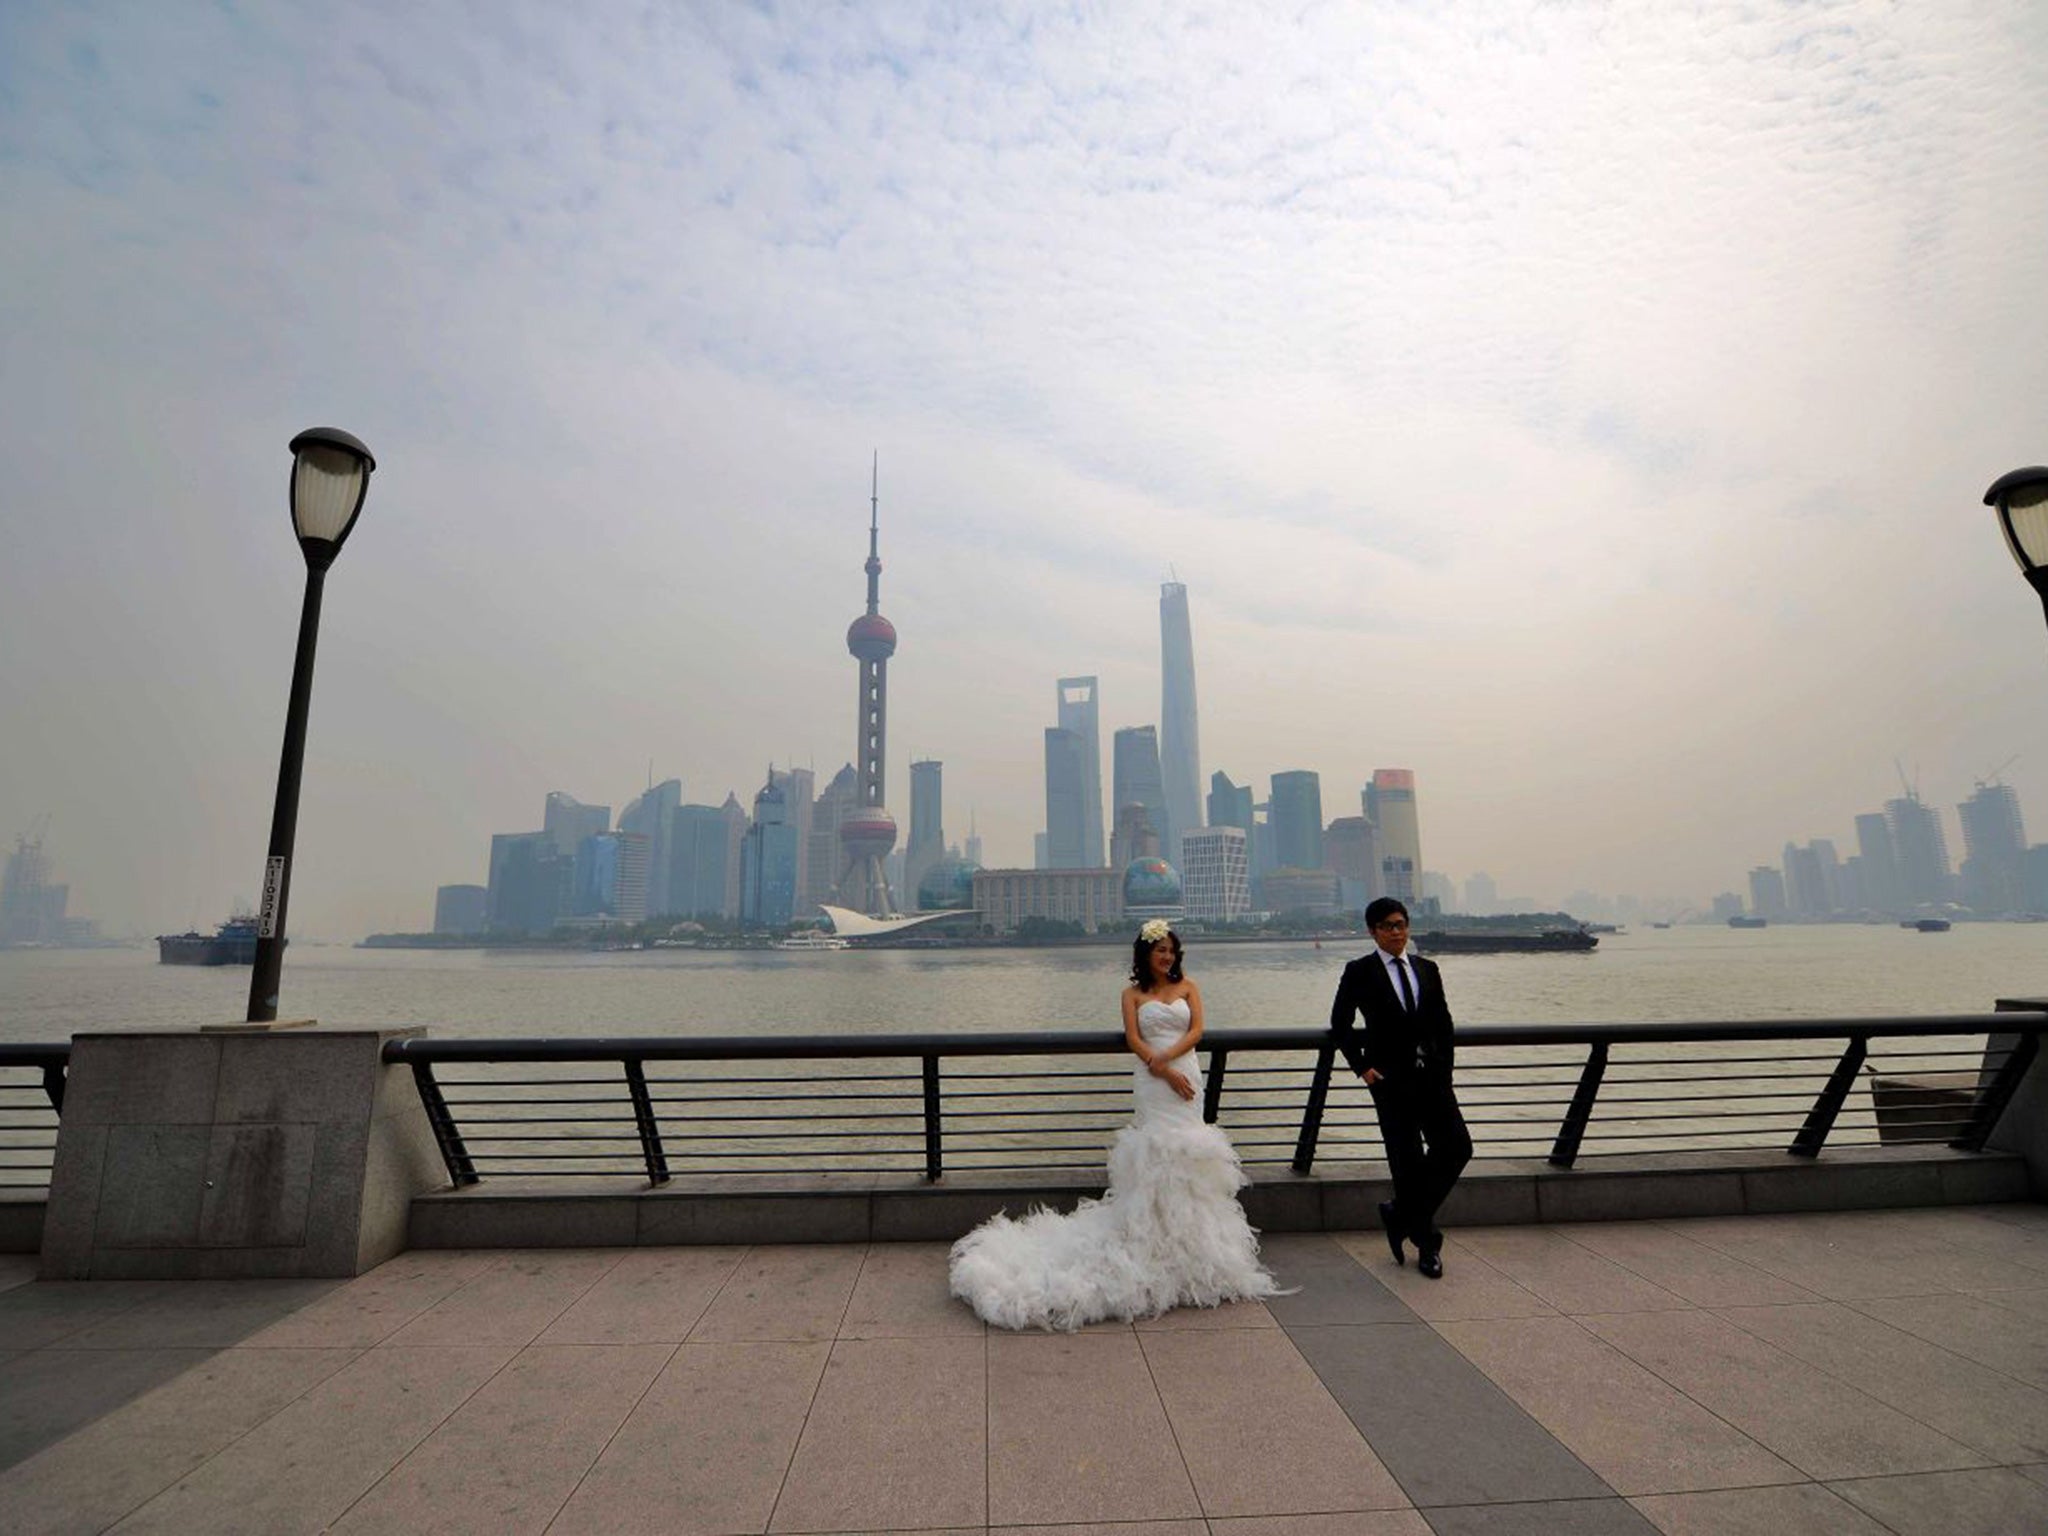 A recently married couple take wedding photos in front of Shaghai's business district